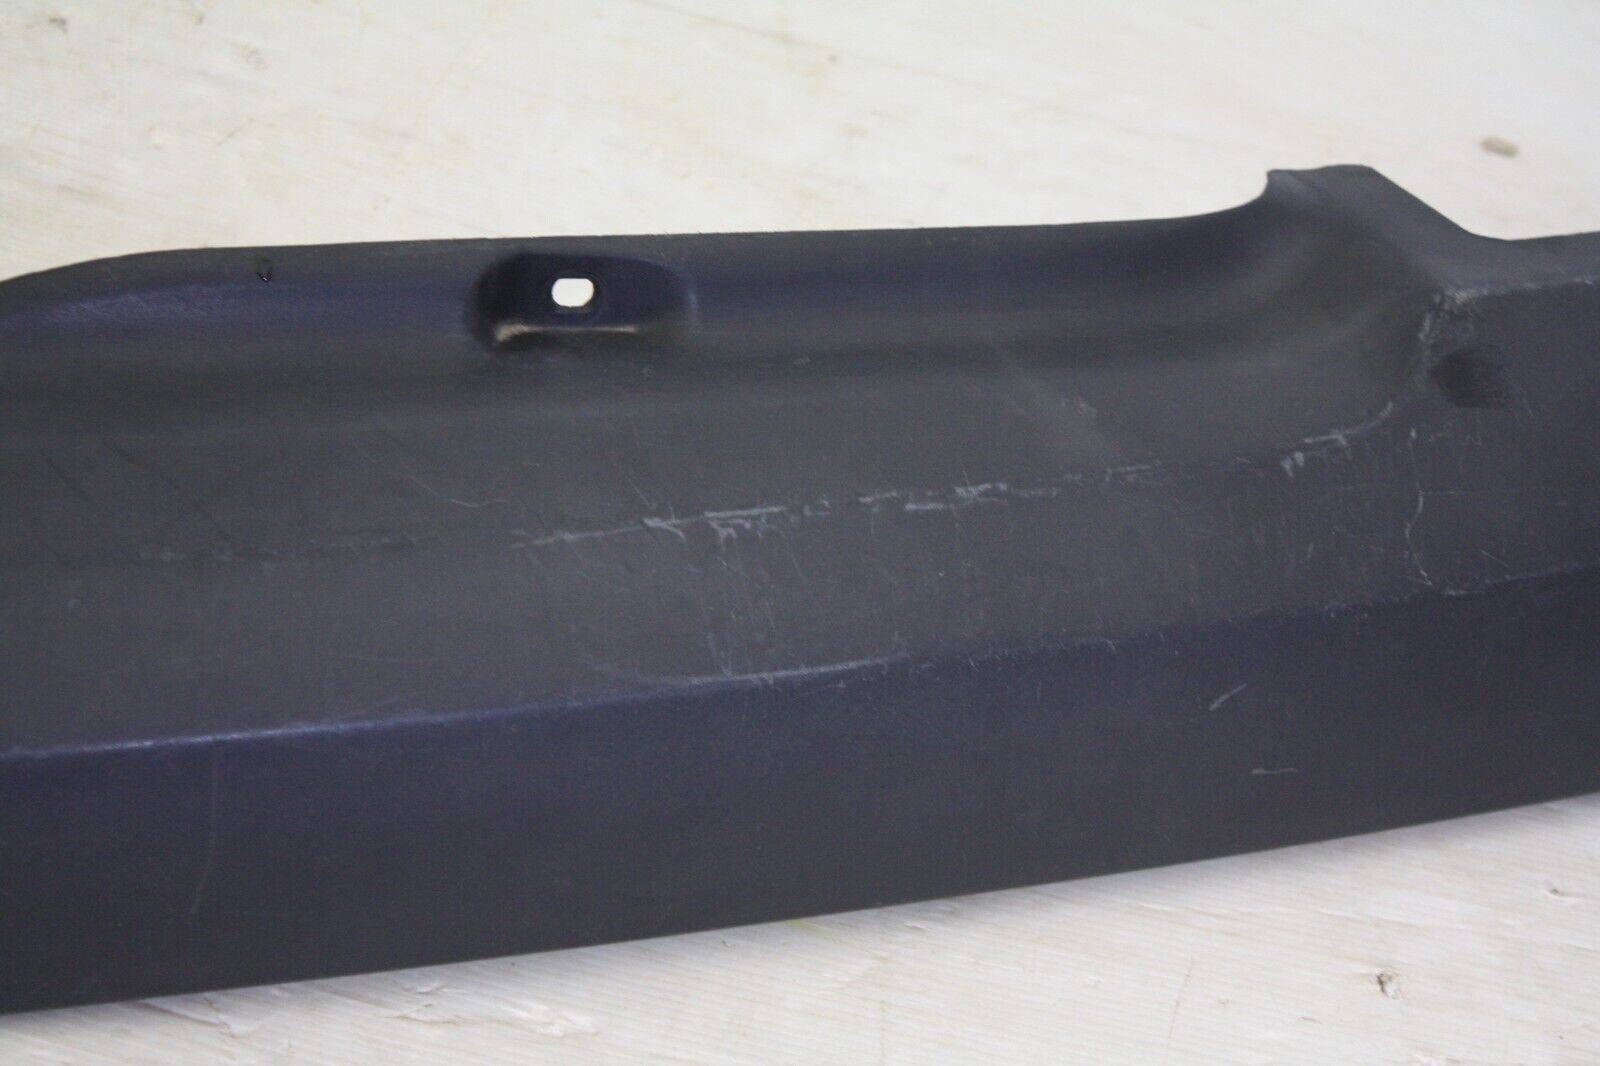 Renault-Clio-Rear-Bumper-Upper-Section-2001-TO-2005-8200083217-Genuine-176093485781-11